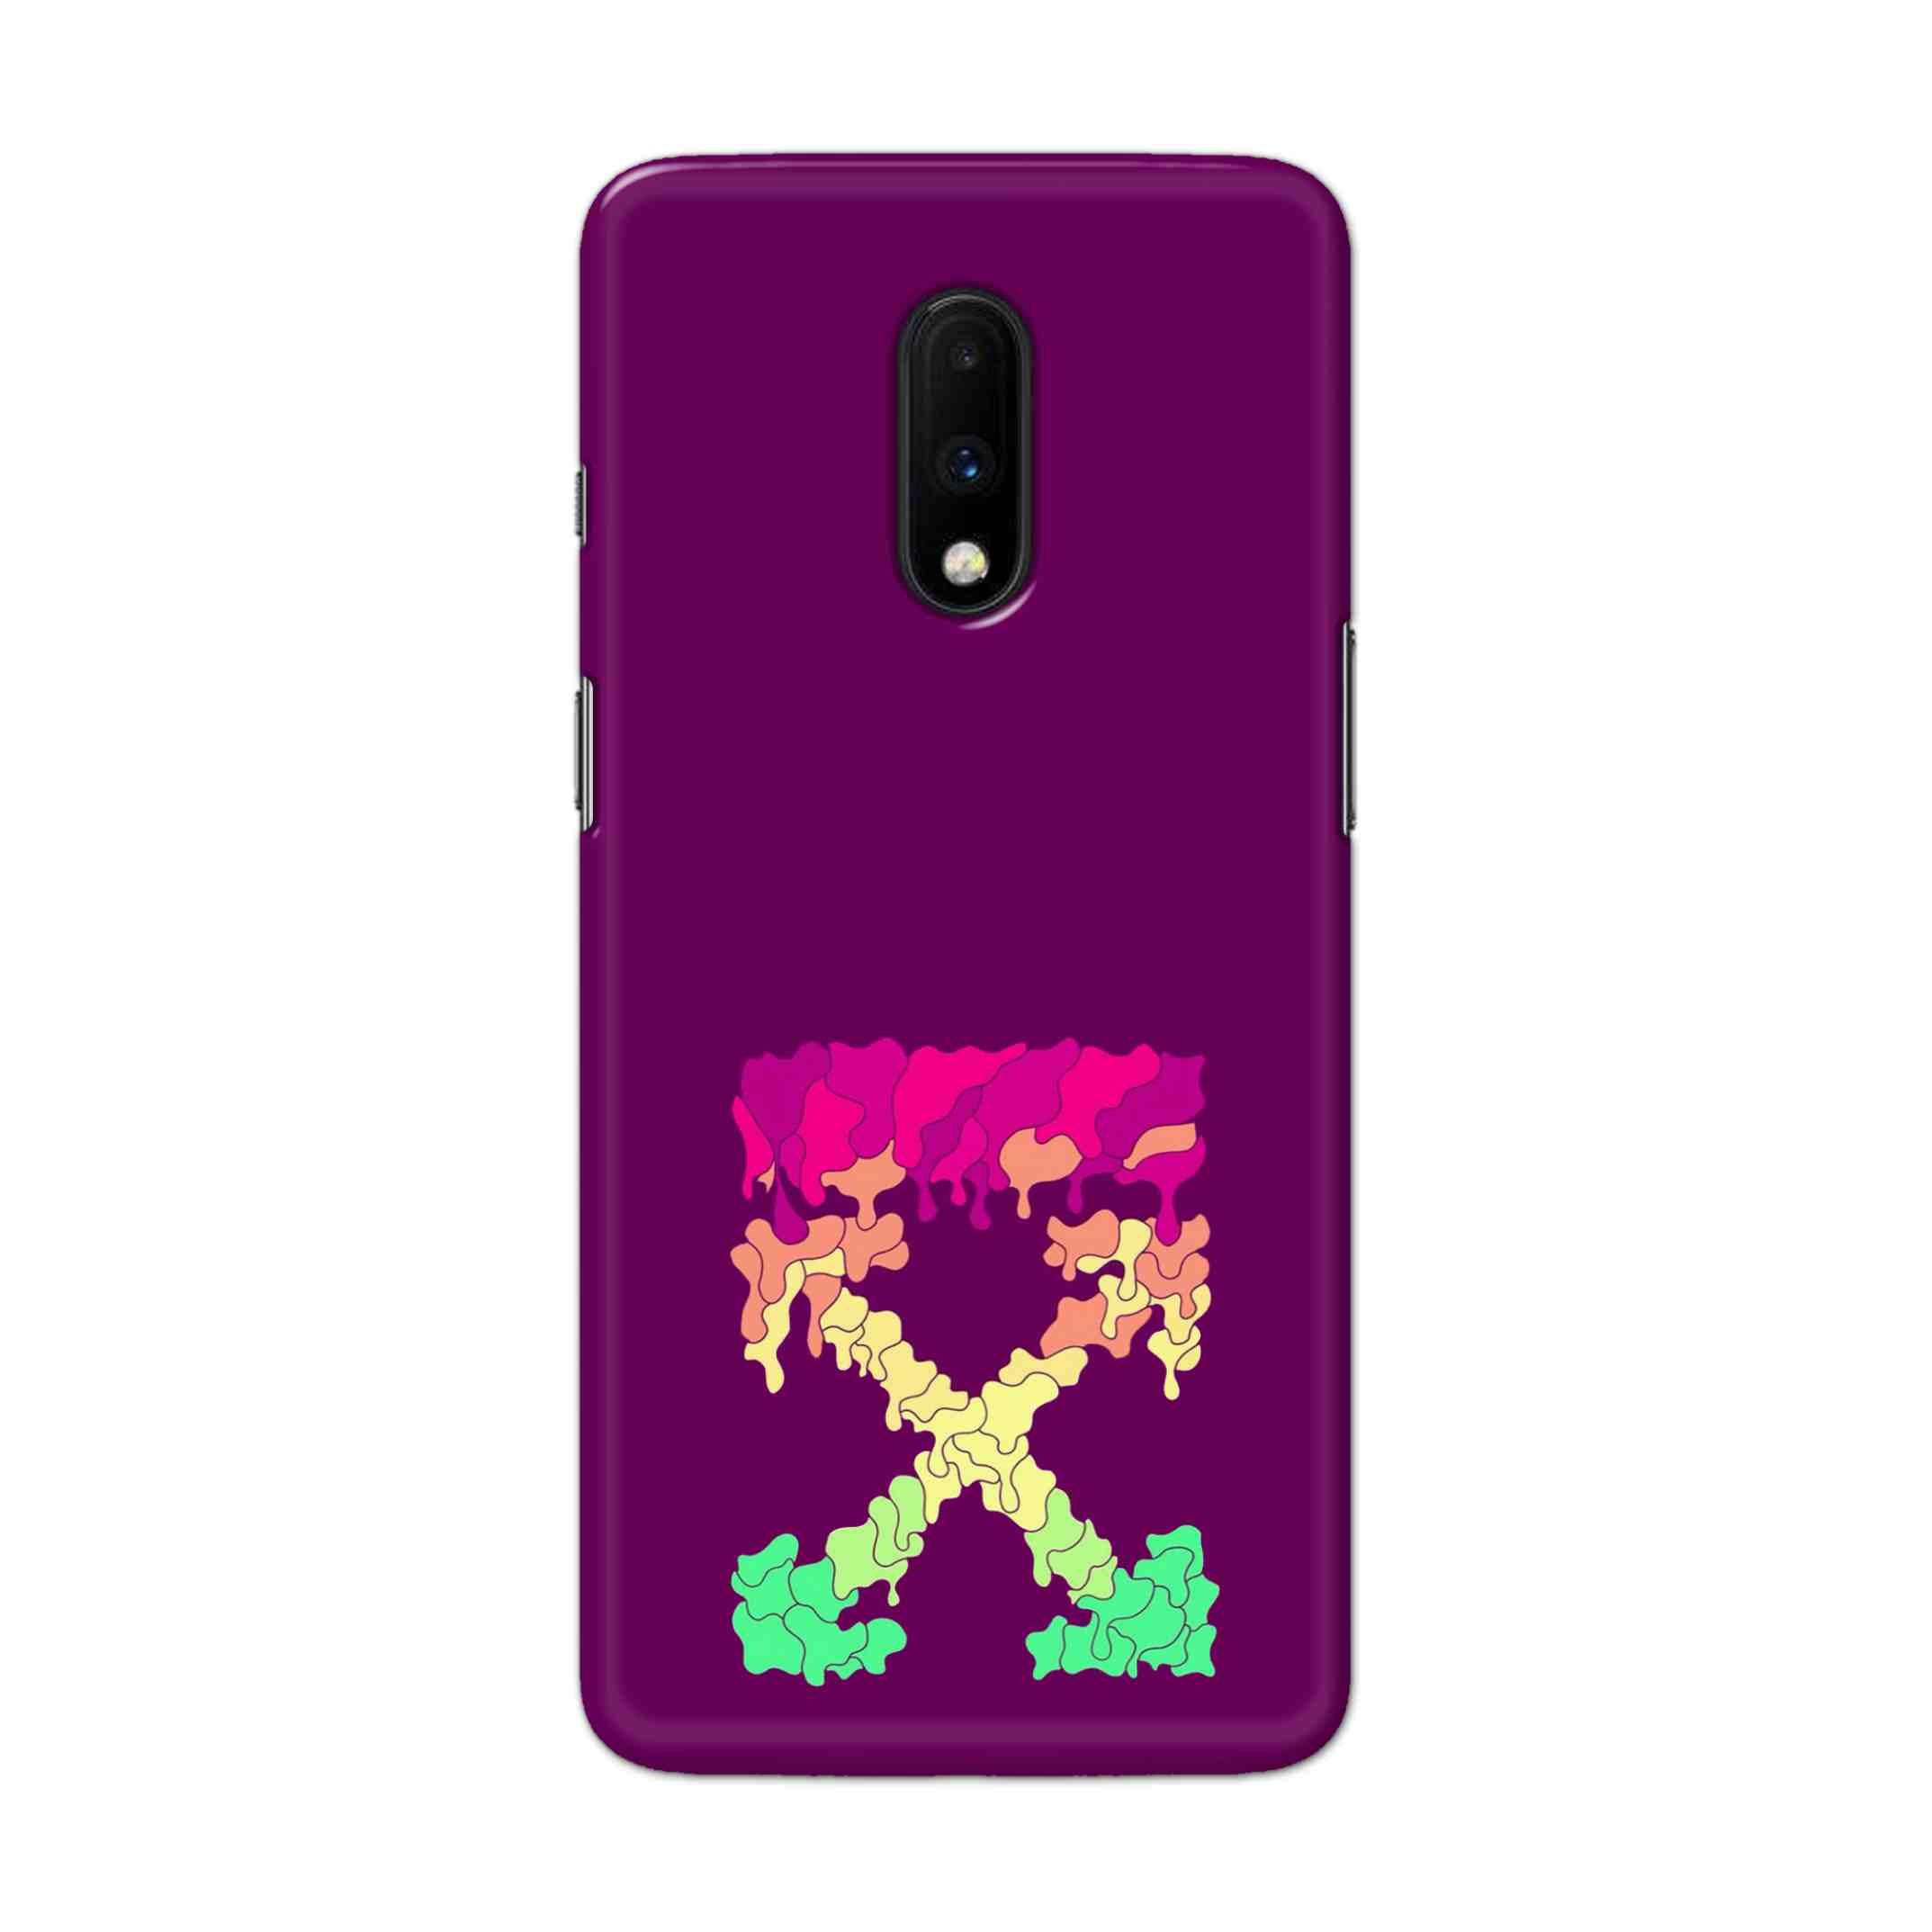 Buy X.O Hard Back Mobile Phone Case Cover For OnePlus 7 Online